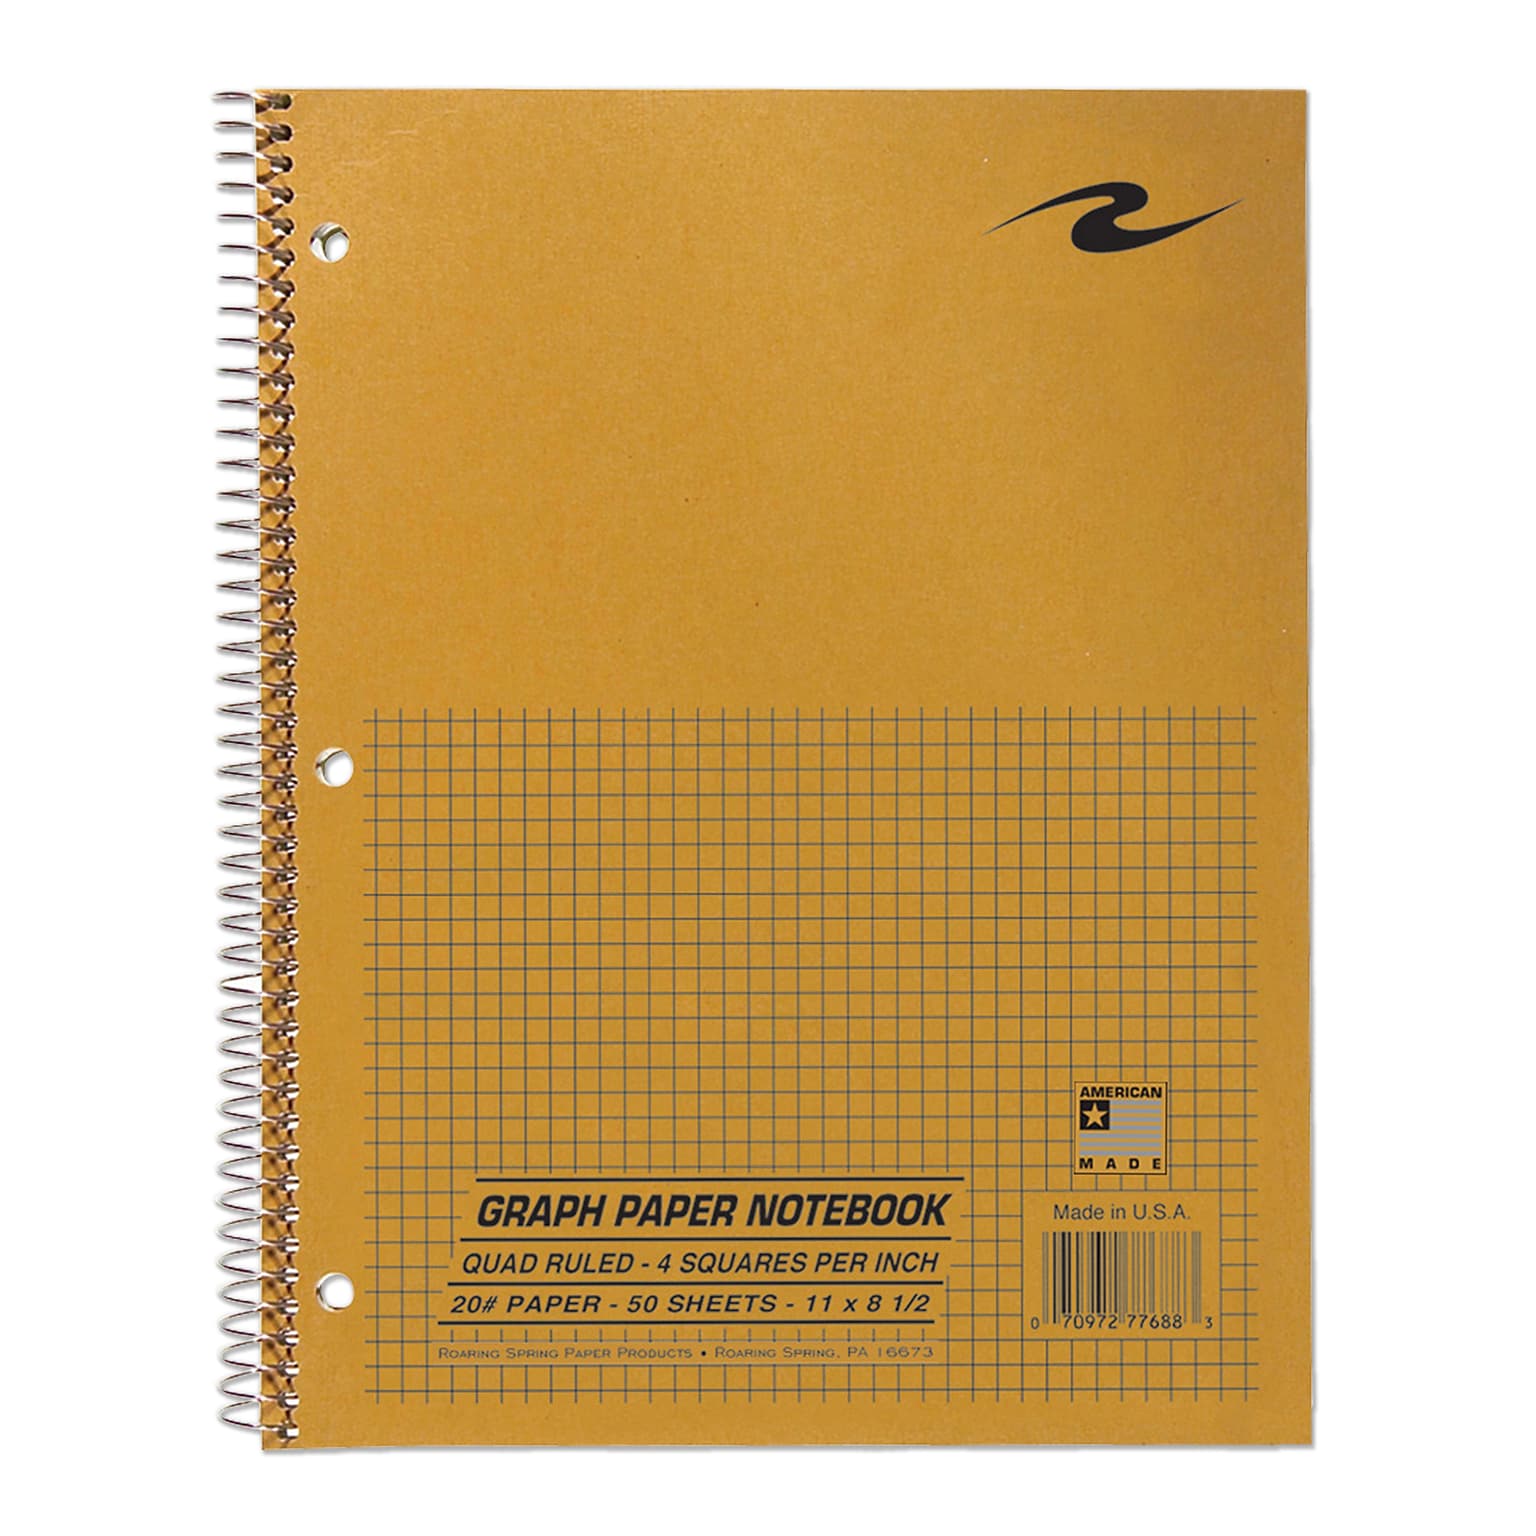 Roaring Spring Paper Products 1-Subject Notebooks, 8.5 x 11, Graph Ruled, 50 Sheets, Brown, 24/Case (77688CS)